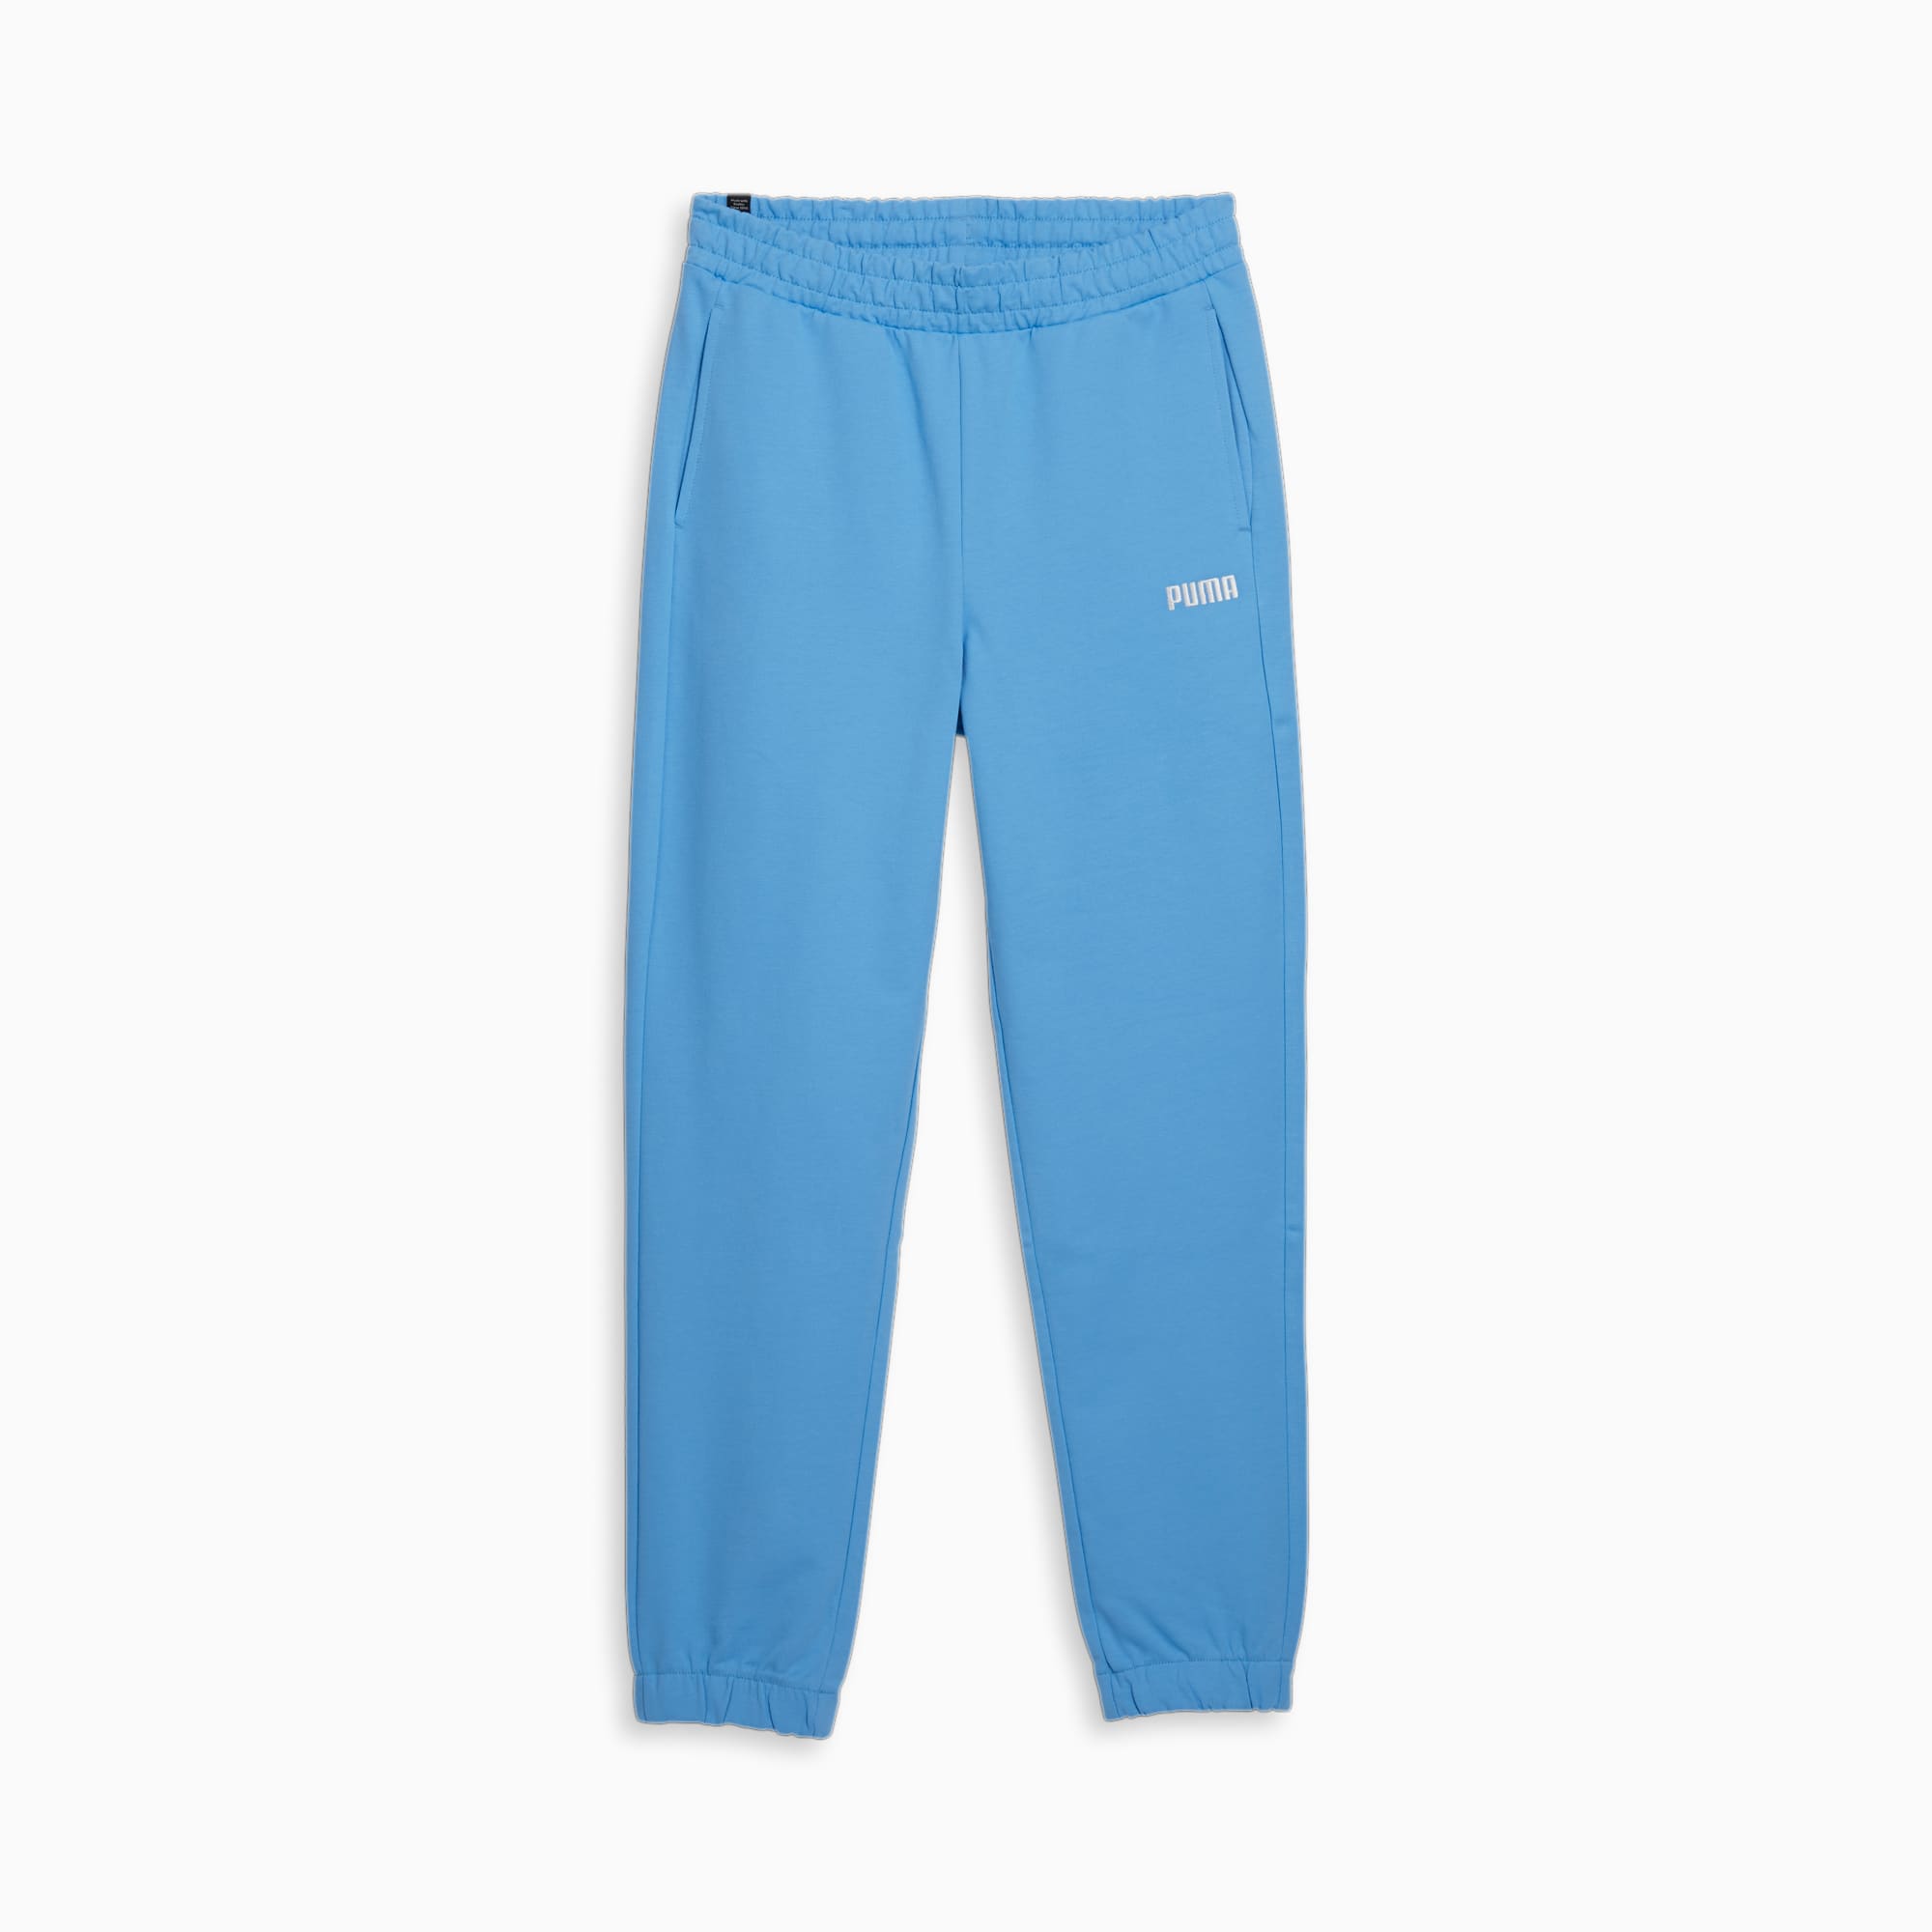 zanvin Women Drawstring Sweatpants High Waisted Joggers Cotton Athletic  Pants with Pockets,Light Blue,XL 